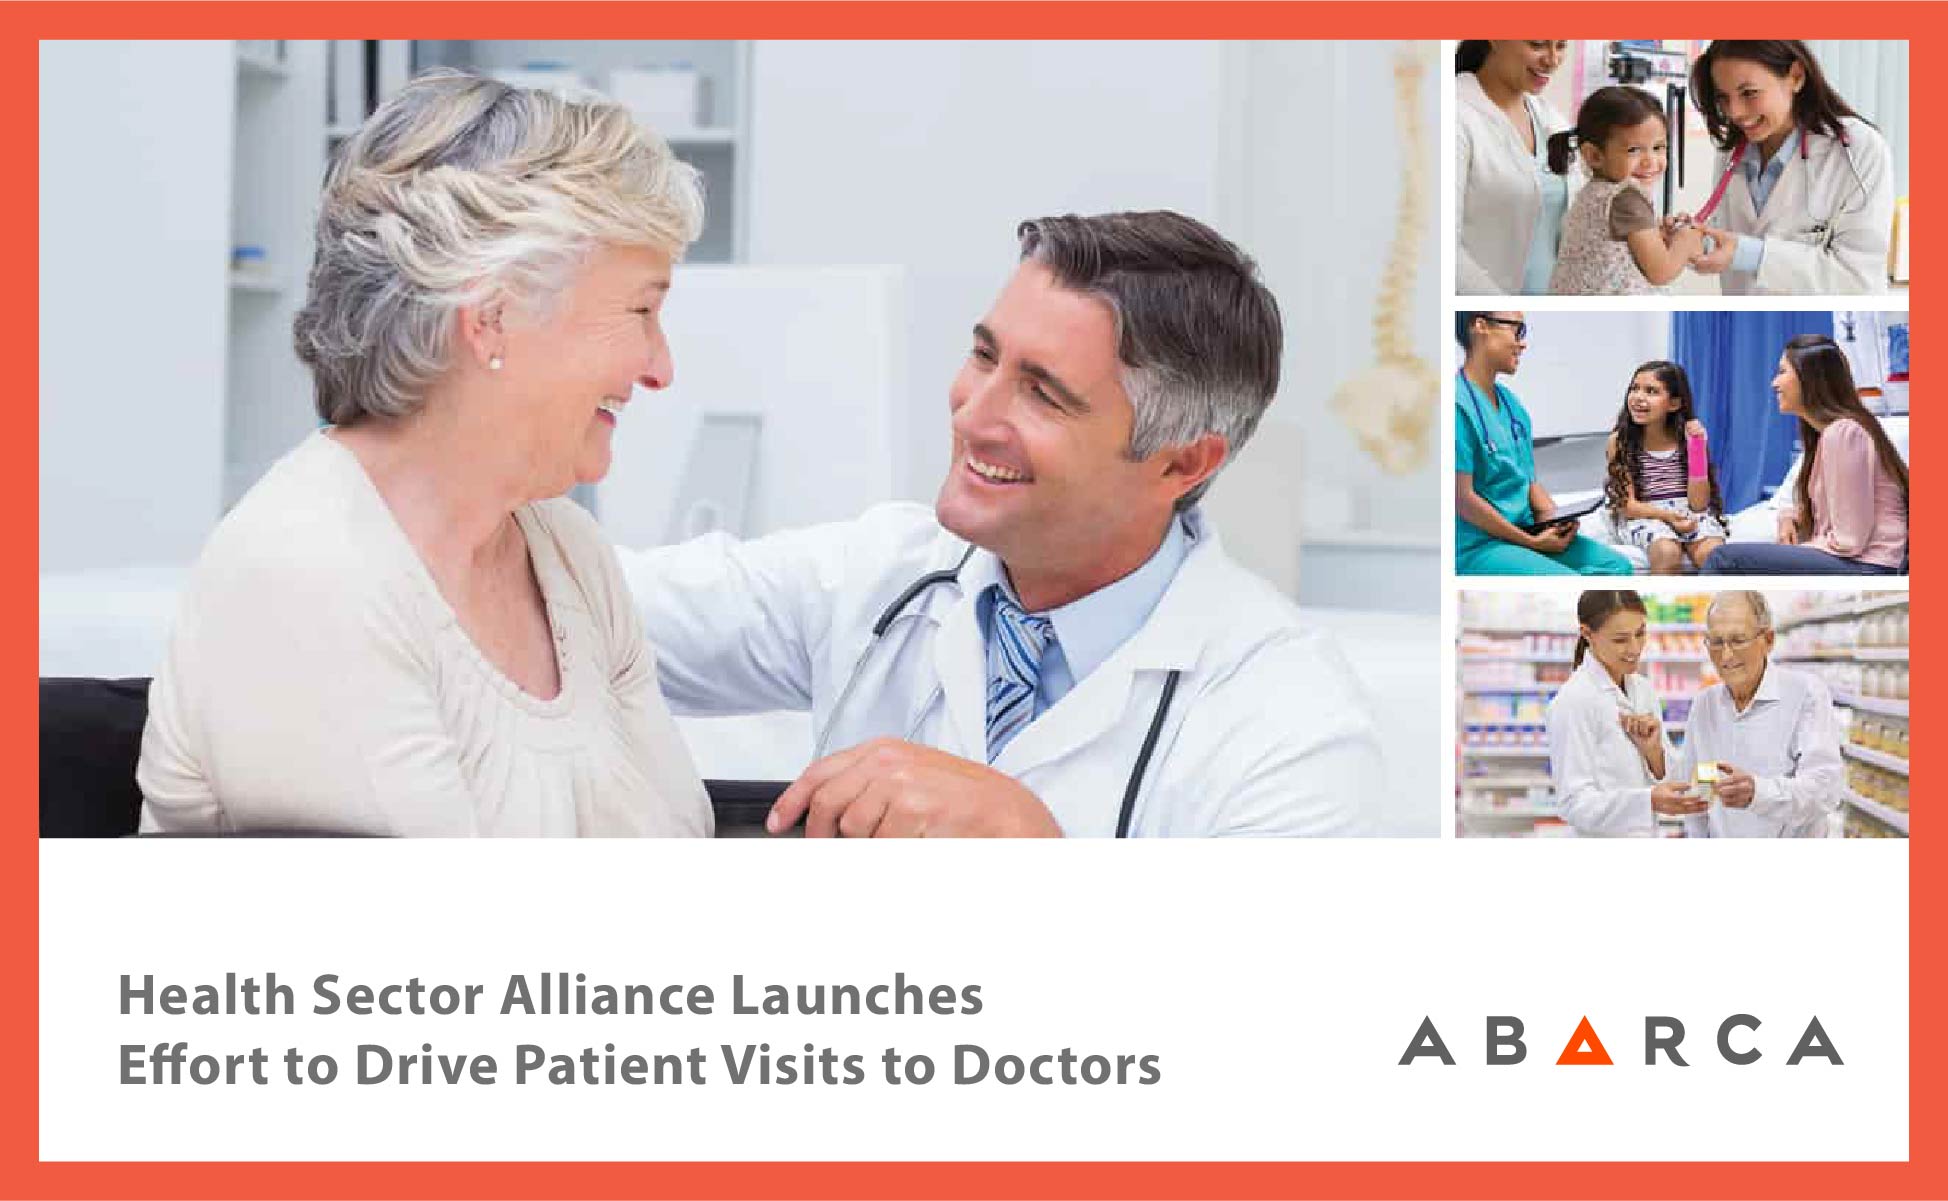 Abarca Health: Health Sector Alliance Launches Effort to Drive Patient Visits to Doctors